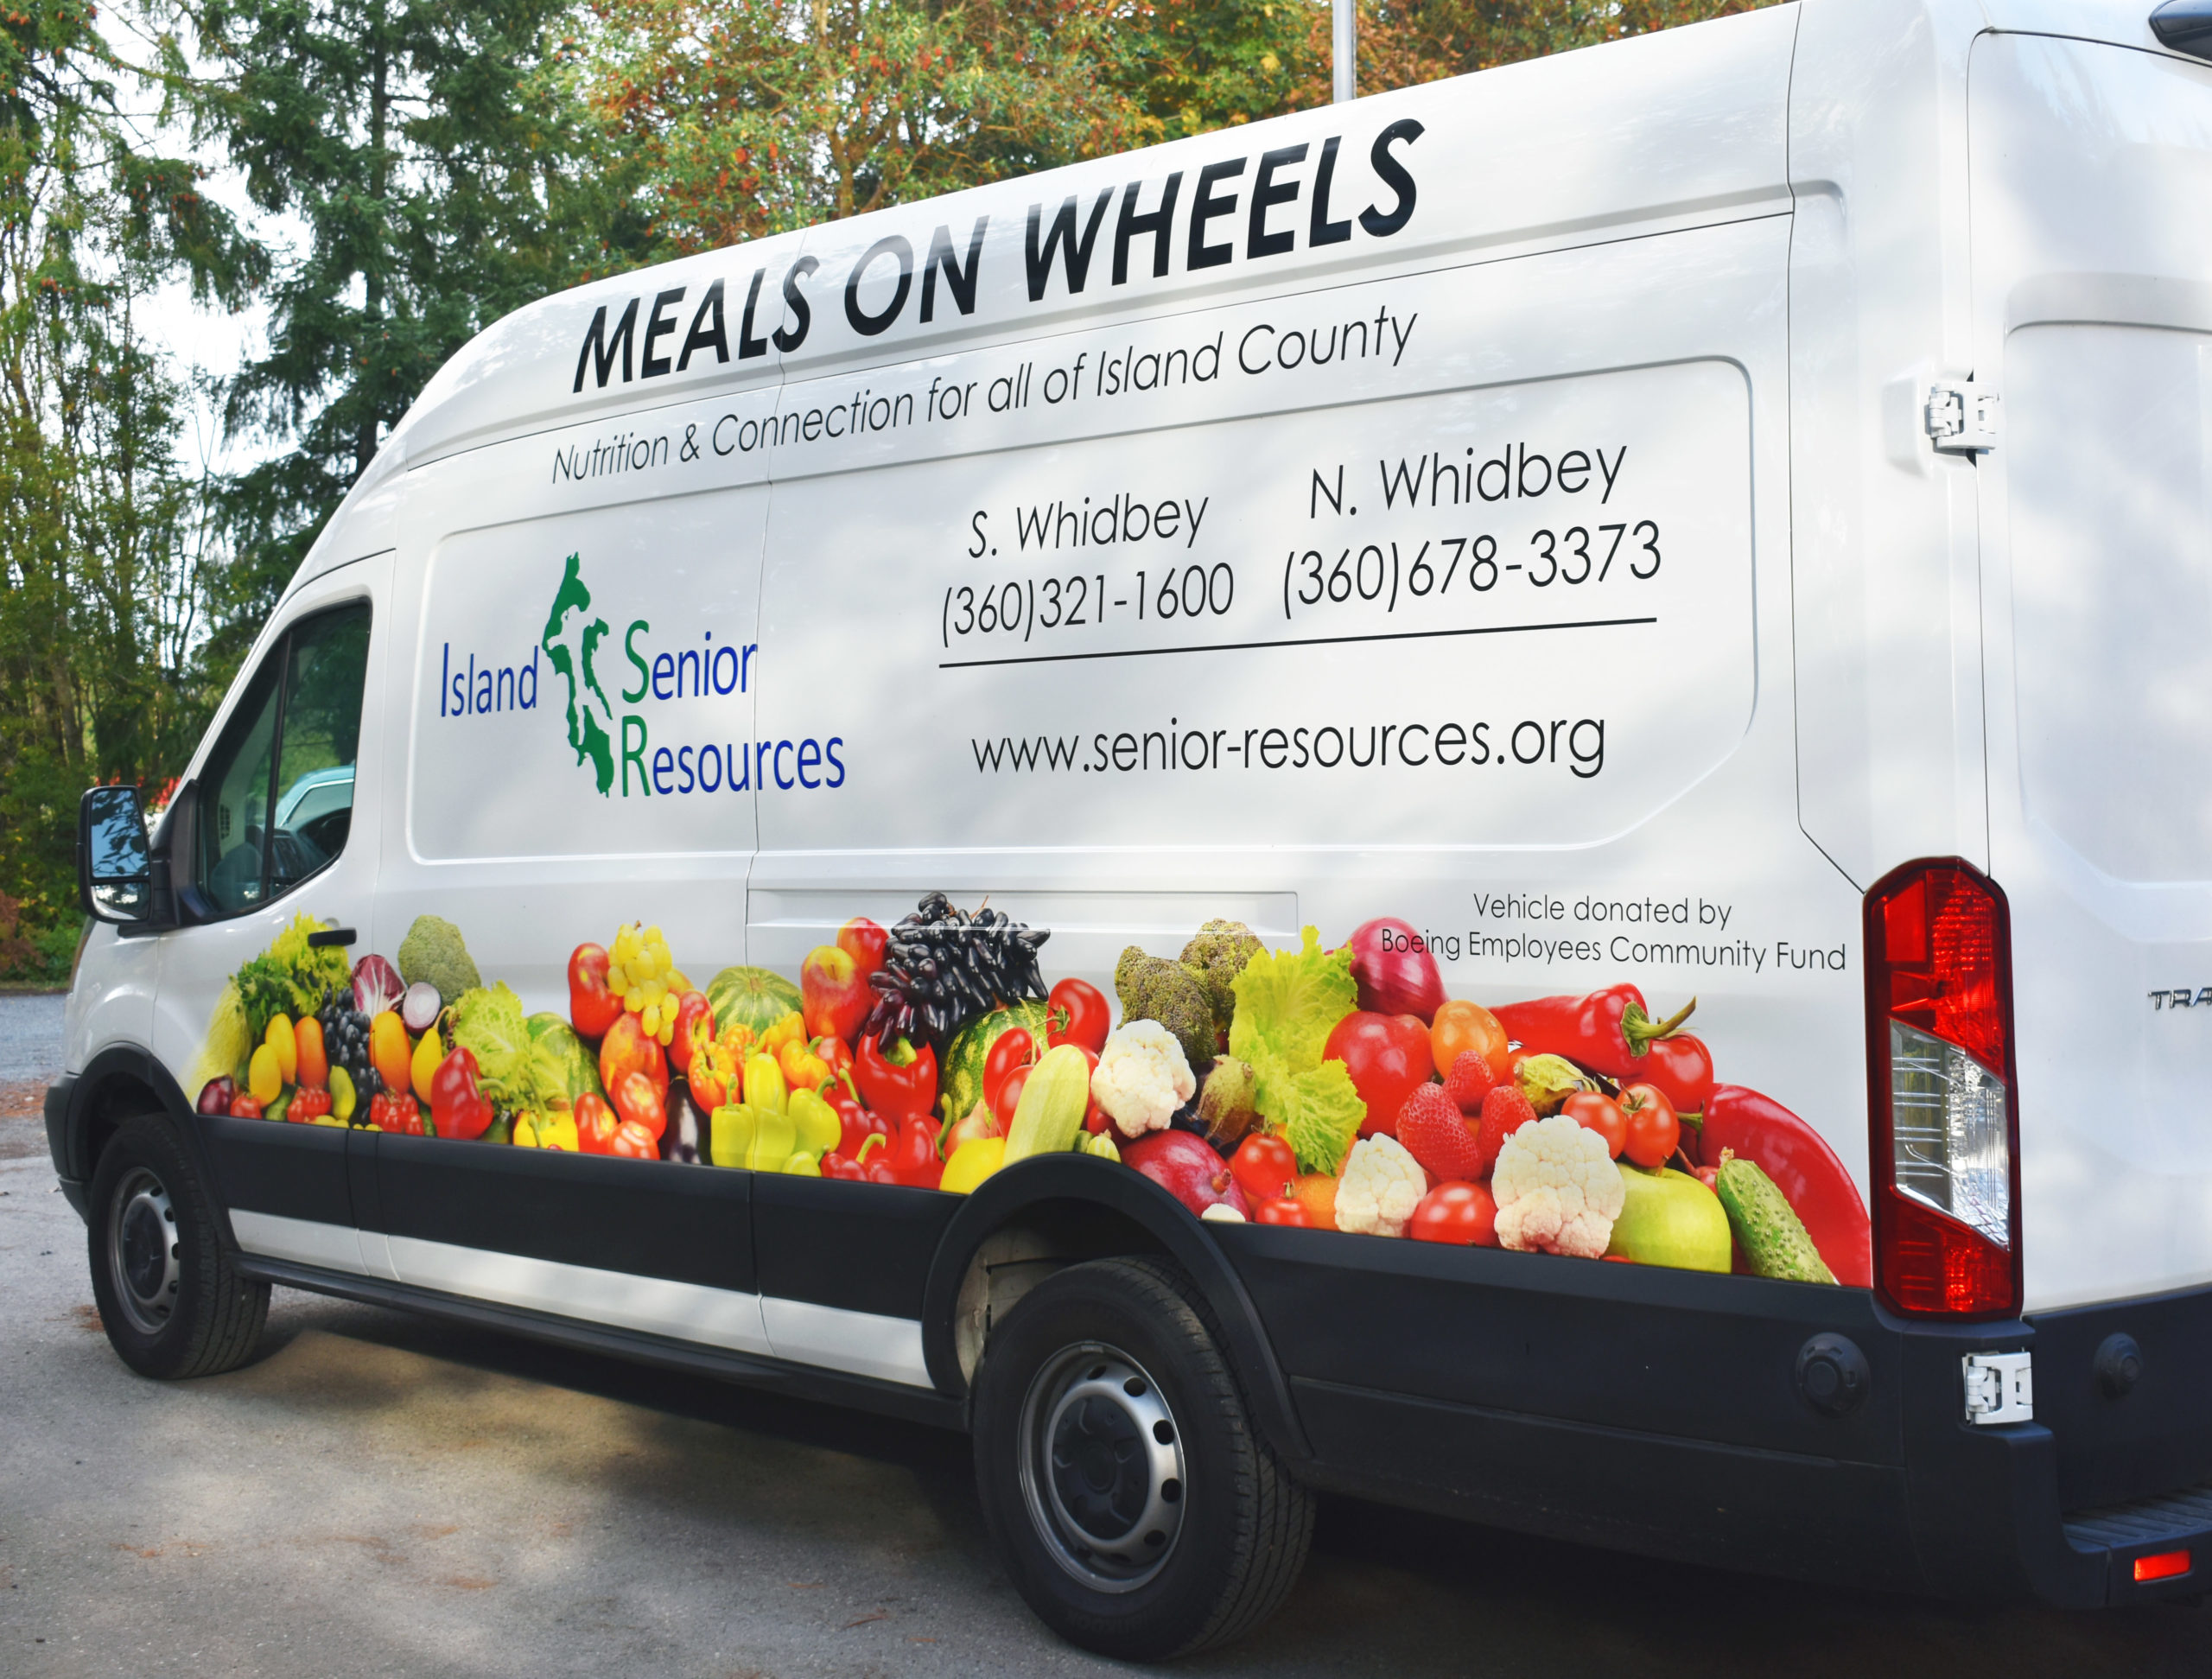 ISR's Meals on Wheels van, funded thanks to a generous donation from Boeing Employee’s Fund